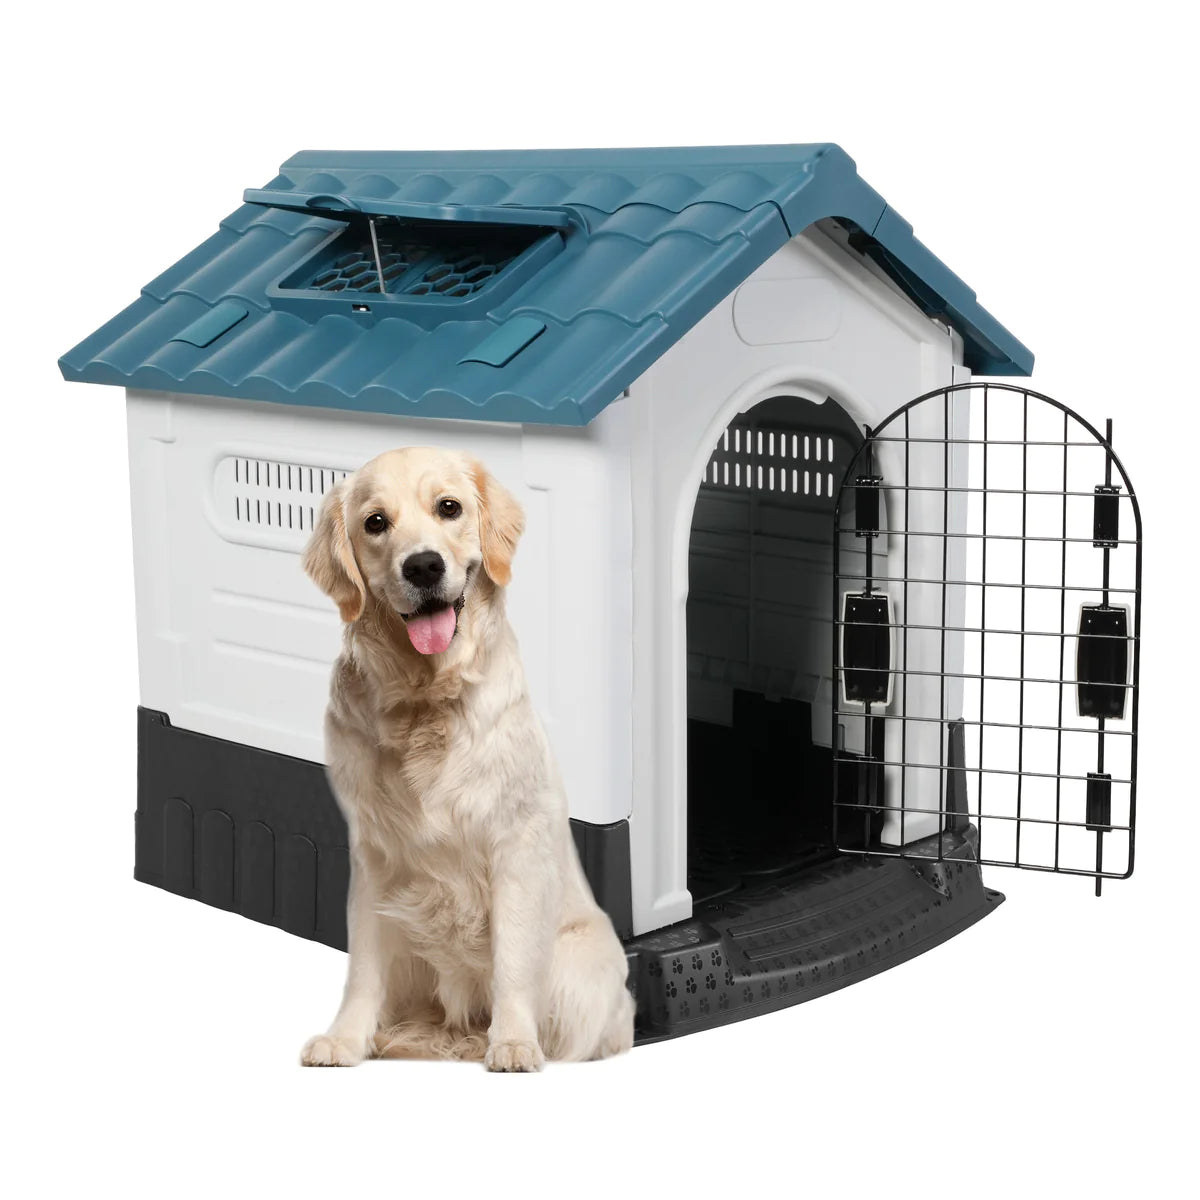 Outdoor Dog Houses Multiple Size Plastic Kennel with Mesh Iron Door and Air Vents